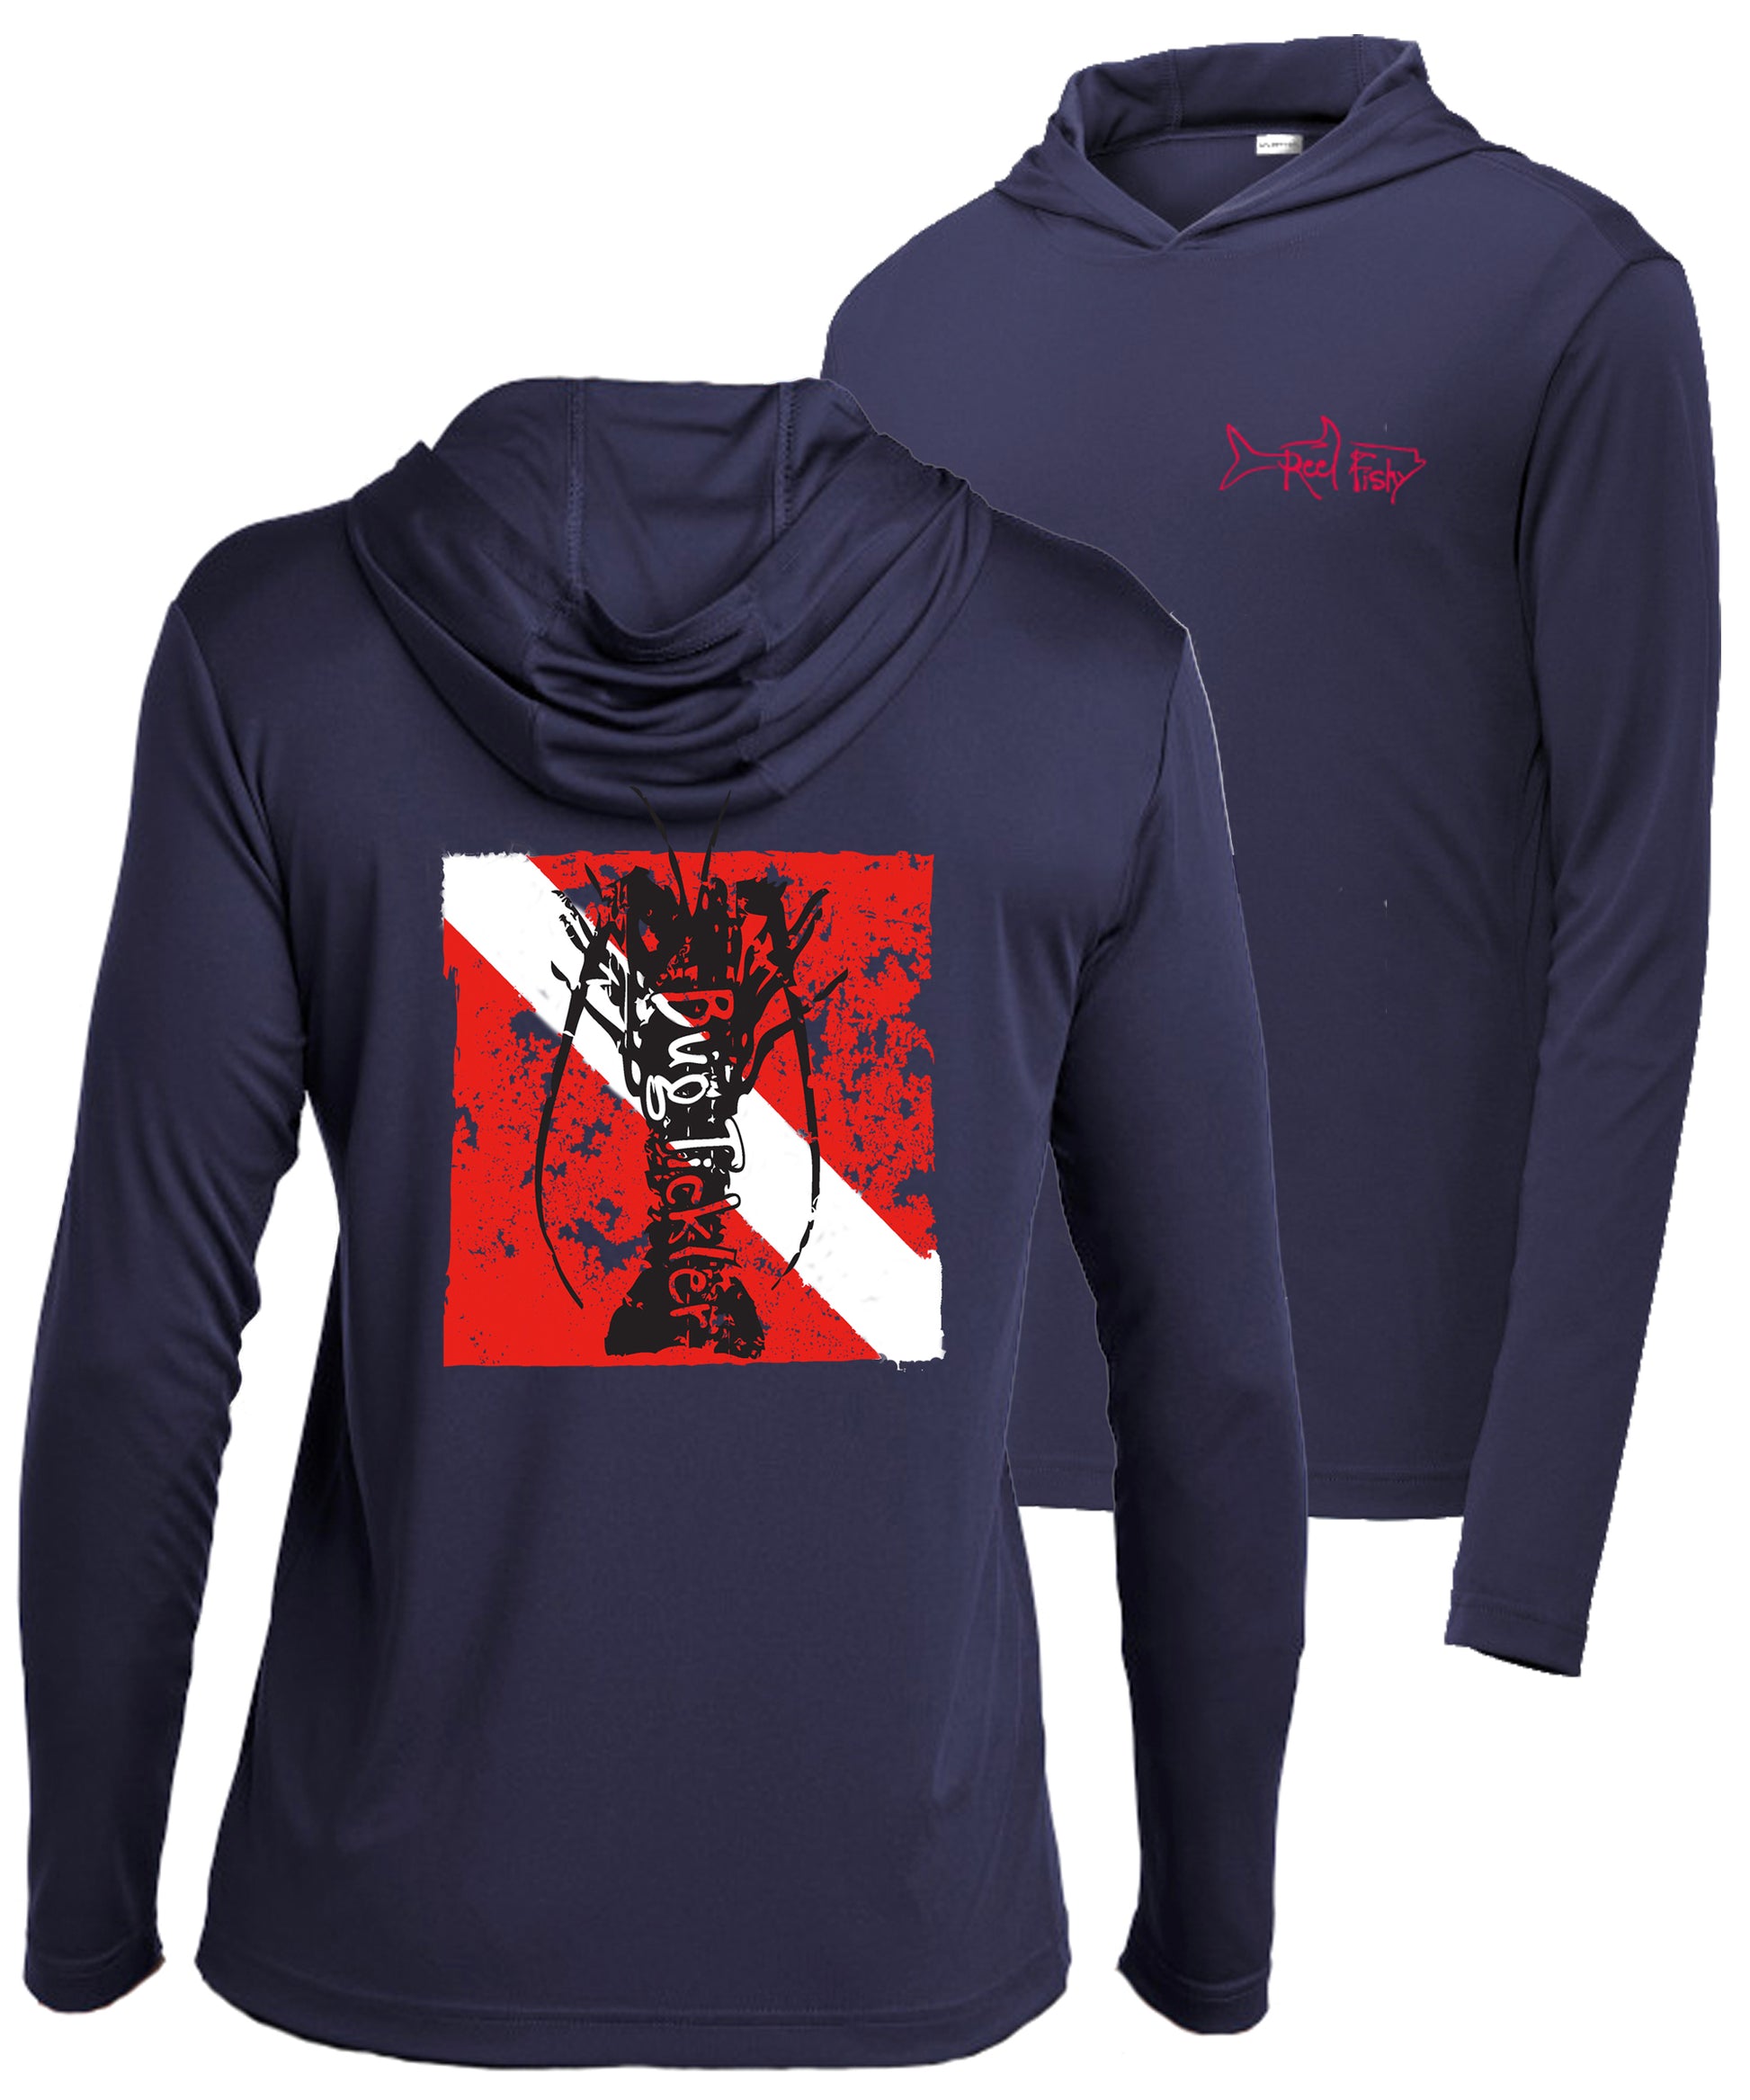 Performance Fishing Hoodies are LIVE! In stock and ready to ship